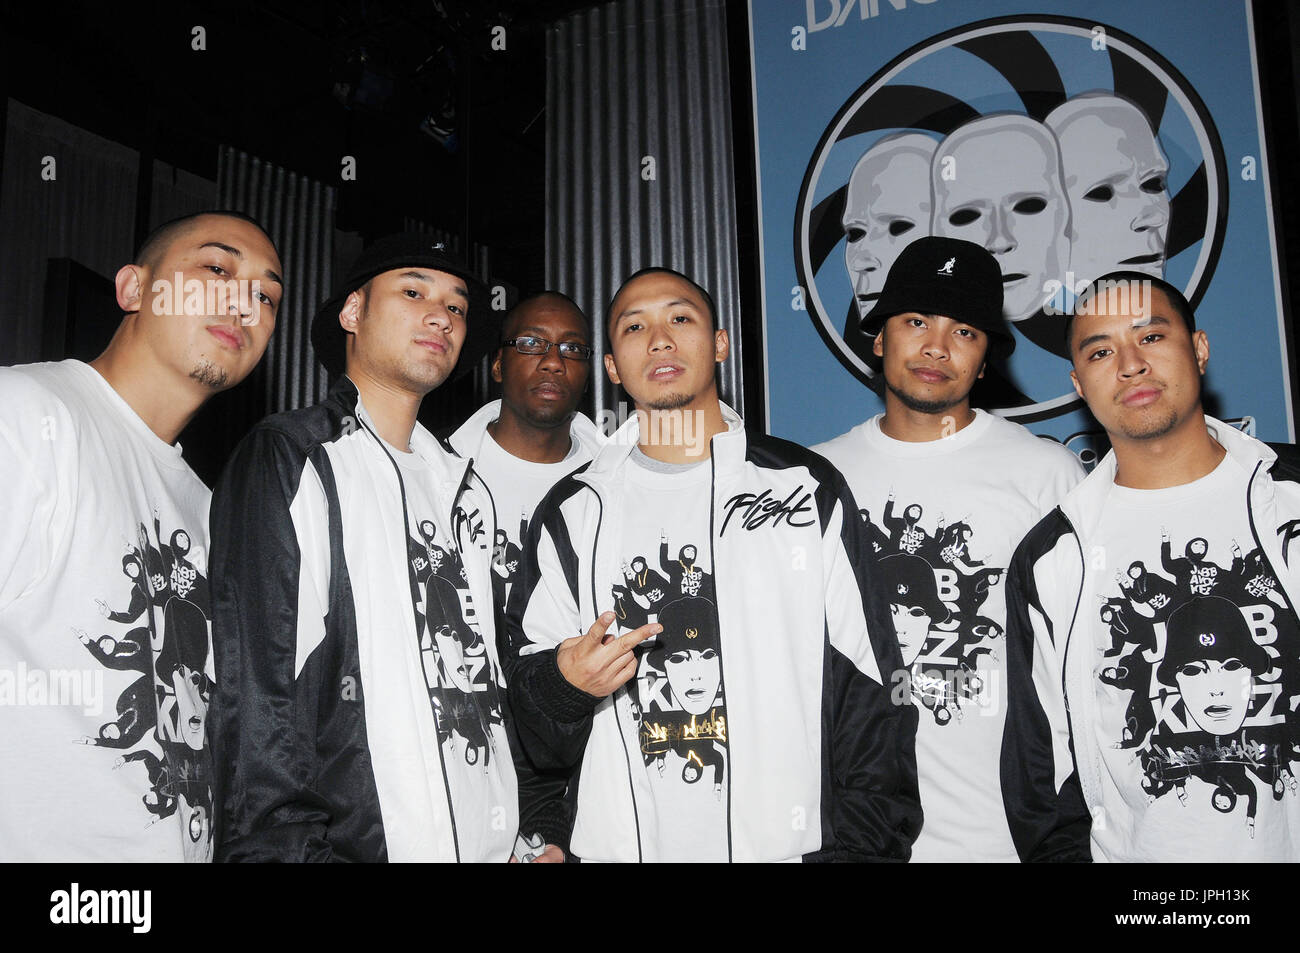 Jabbawockeez at the Live Taping of 'America's Best Dance Crew: Battle for the VMAs' - Backstage of Stage 23 at the Warner Bros. Studio in Burbank, CA. The event took place on Thursday, August 28, 2008. Photo by: Sthanlee B. Mirador Pacific Rim Photo Press. Stock Photo